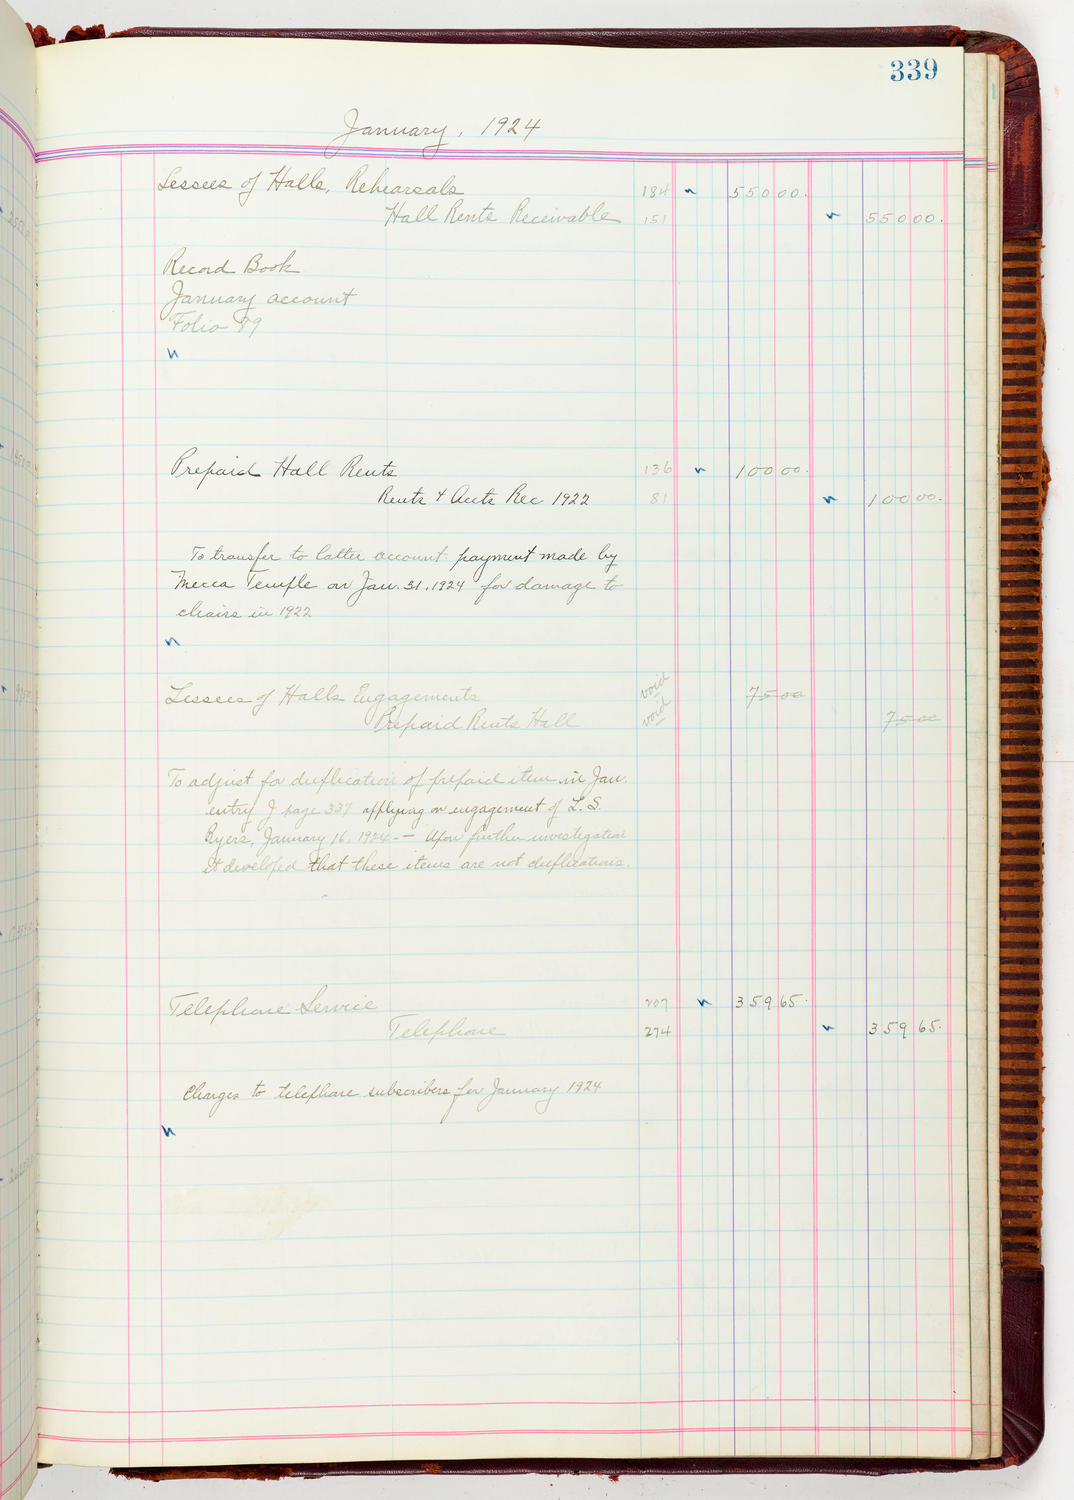 Music Hall Accounting Ledger, volume 5, page 339